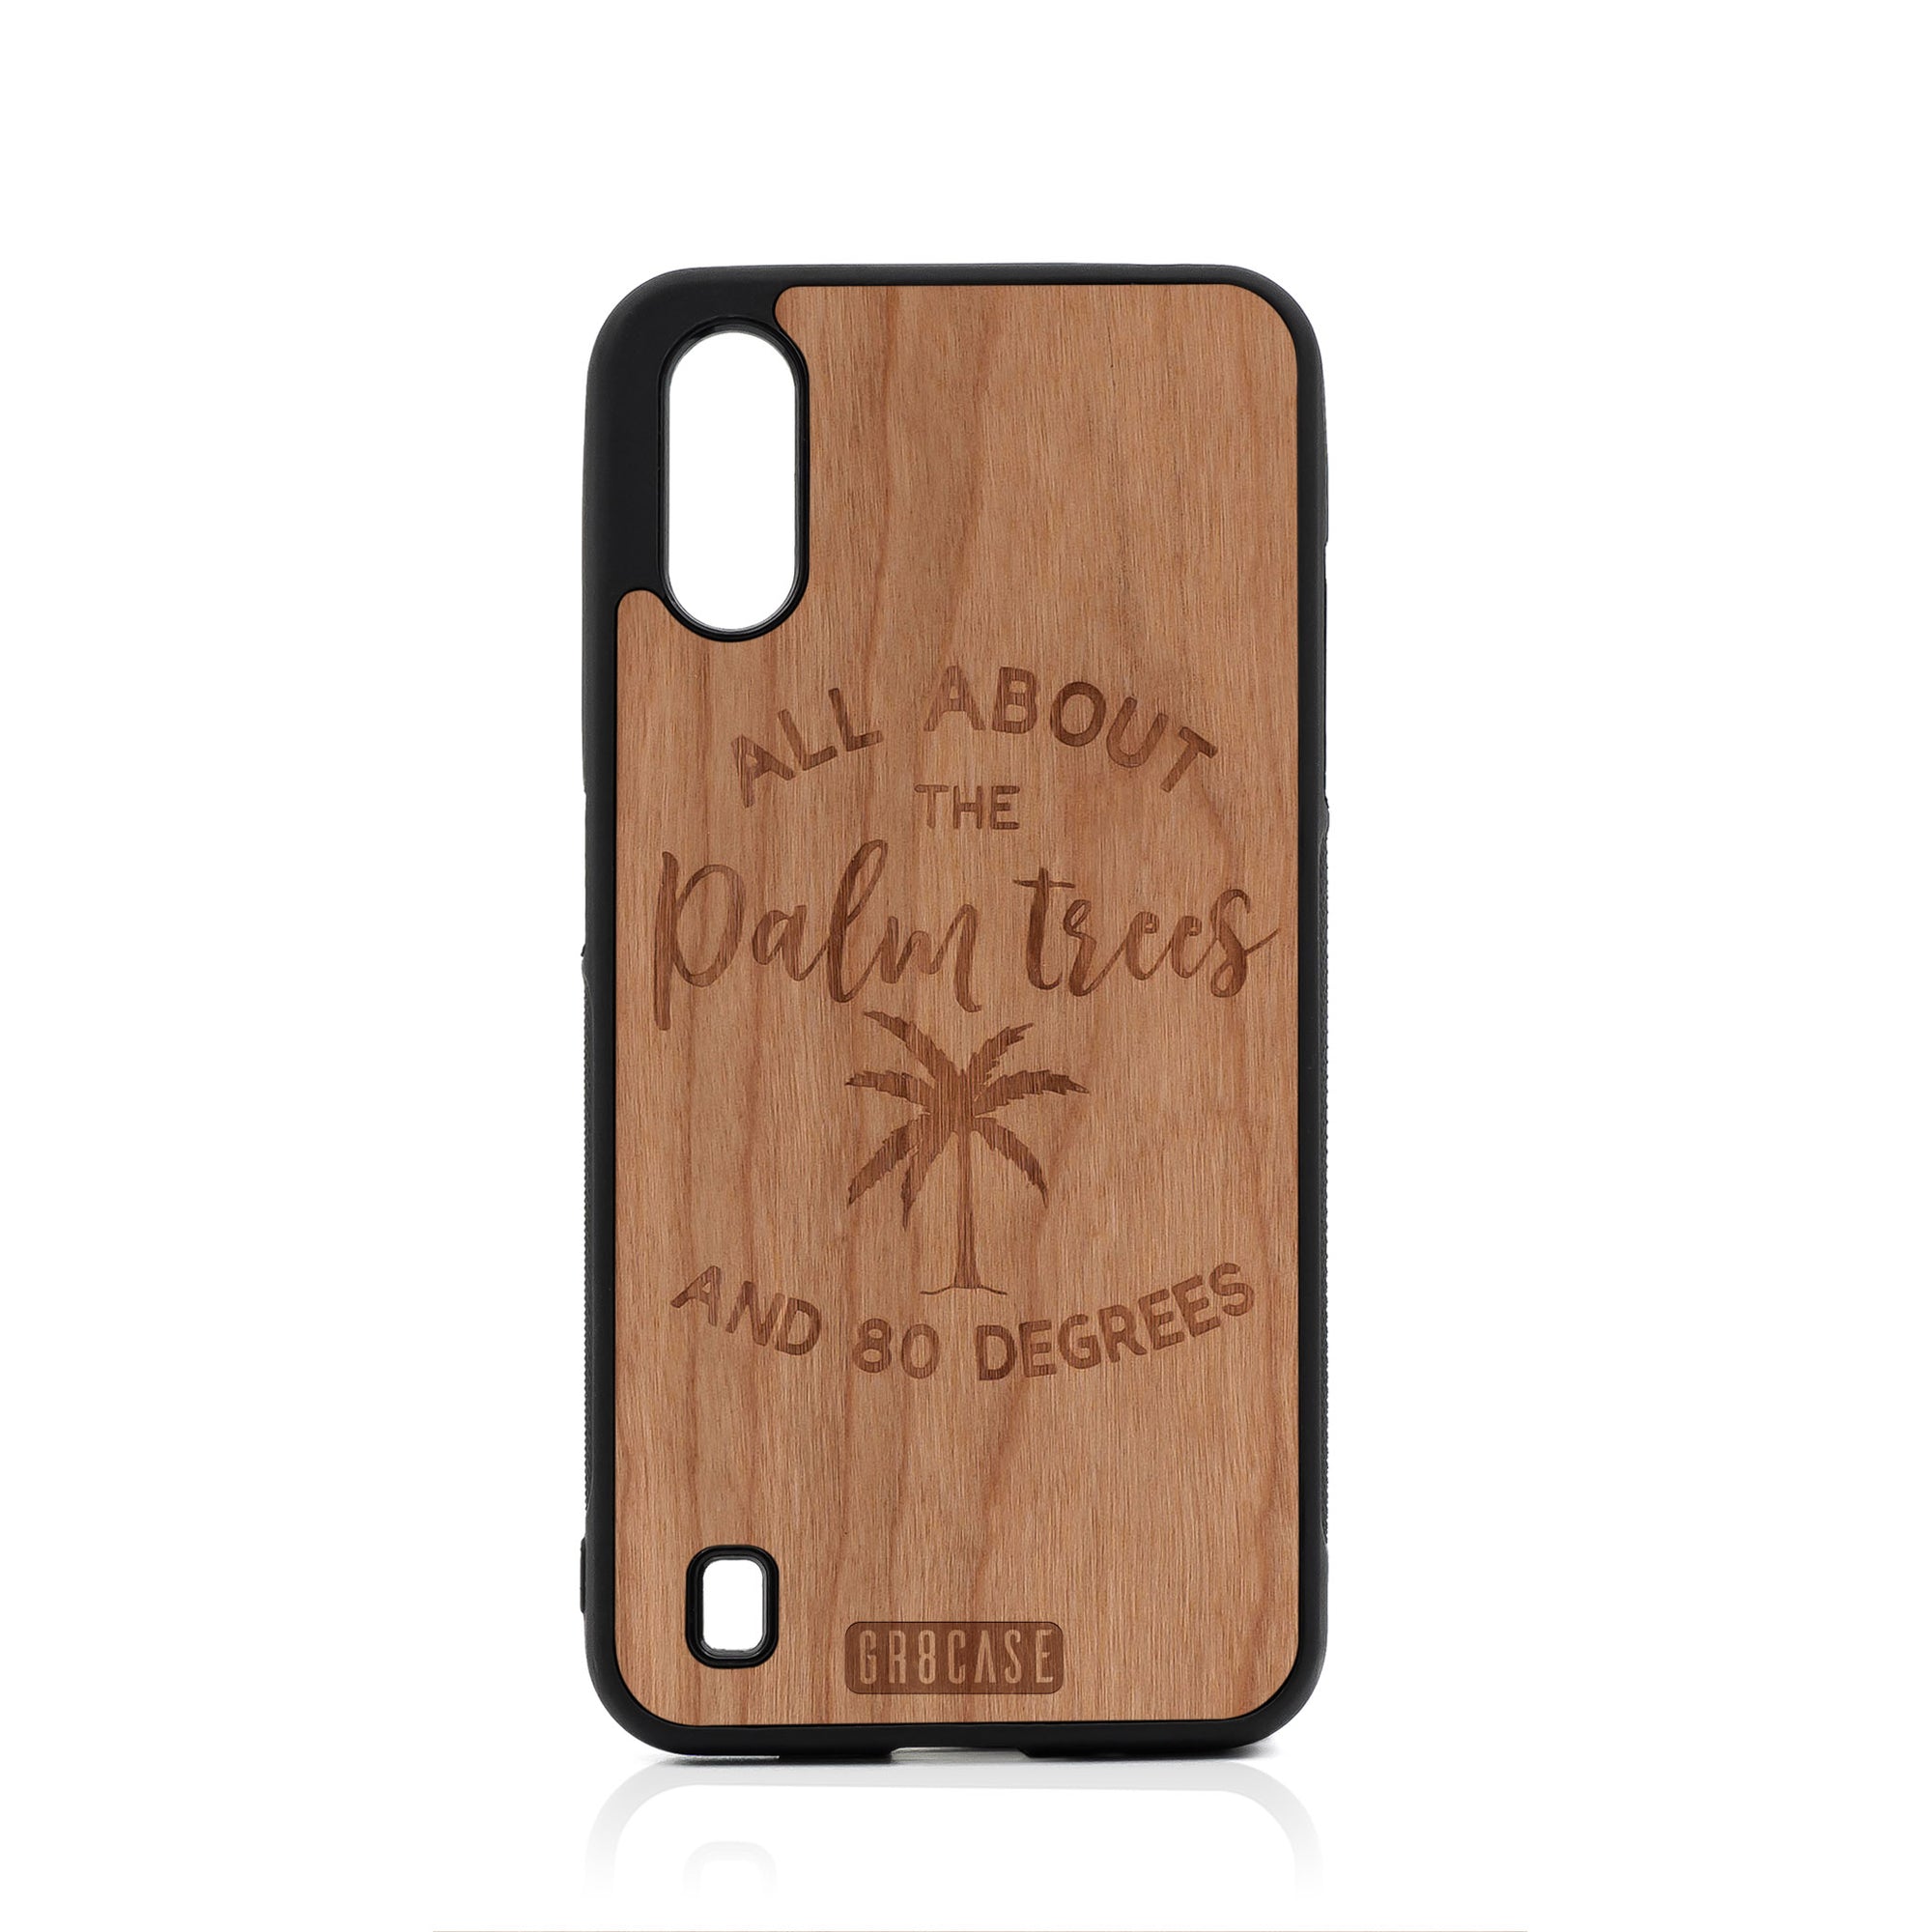 All About The Palm Trees And 80 Degrees Design Wood Case For Samsung Galaxy A01